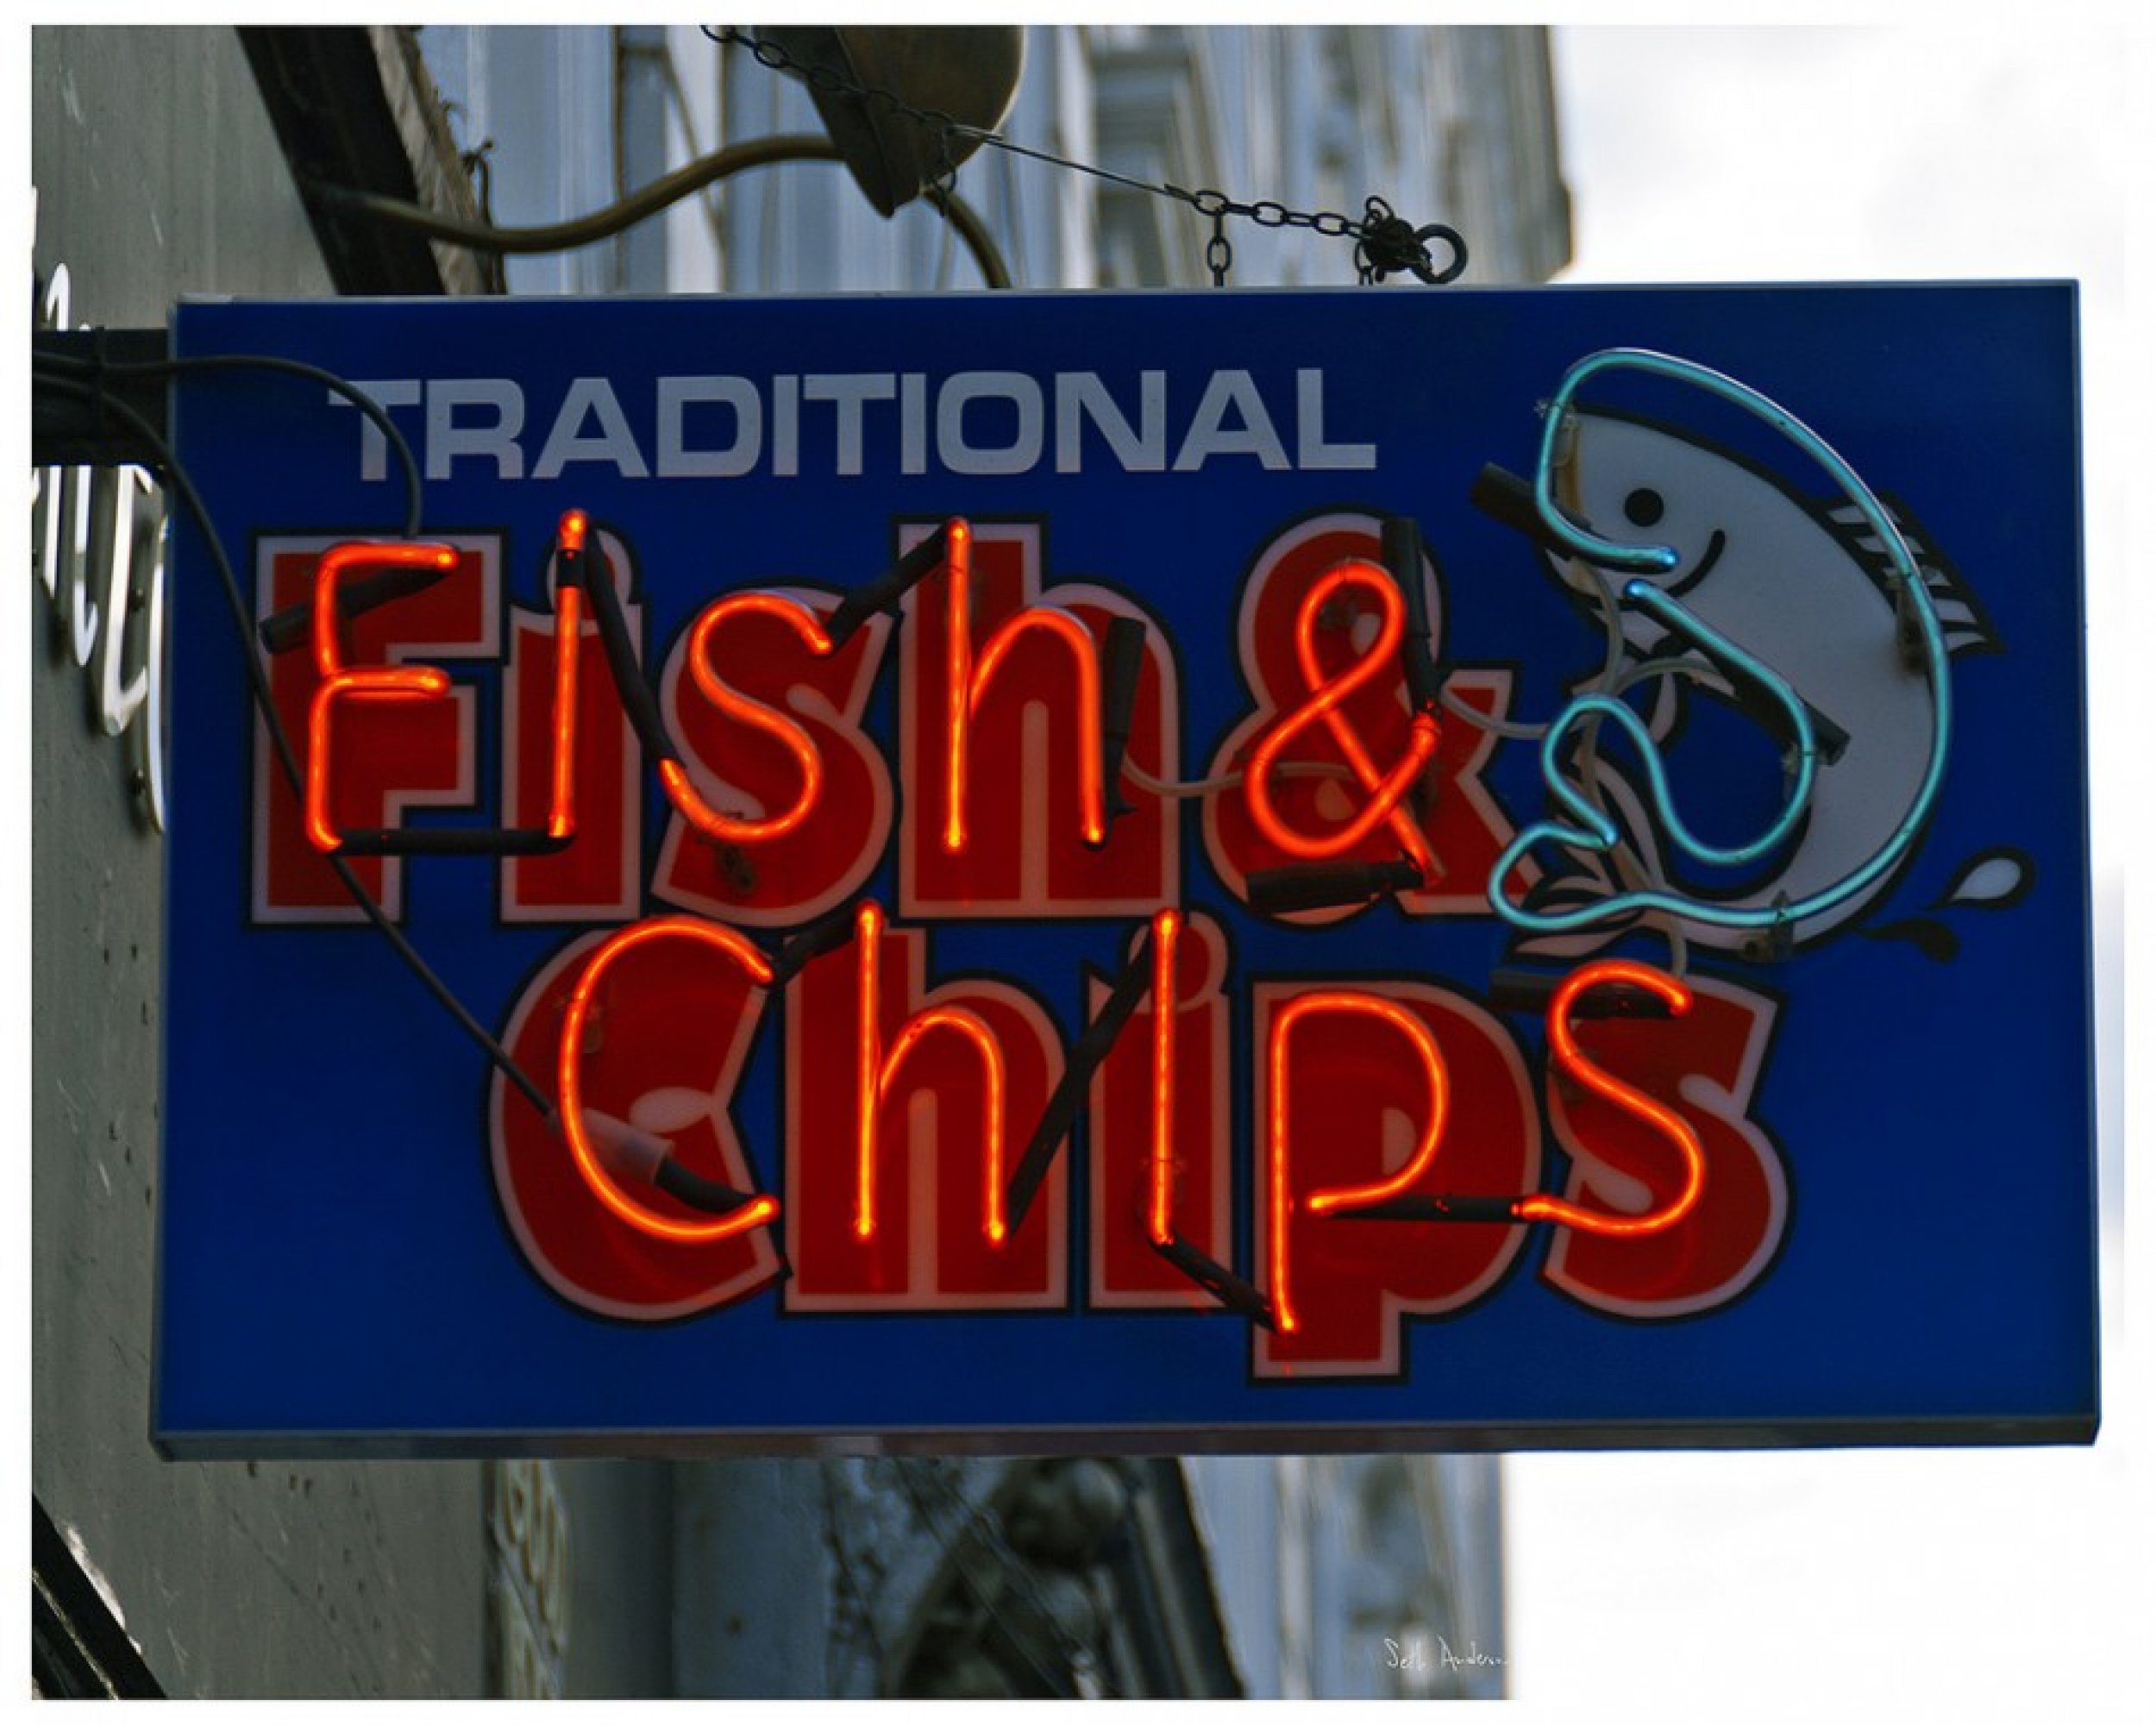 Fish And Chips is British